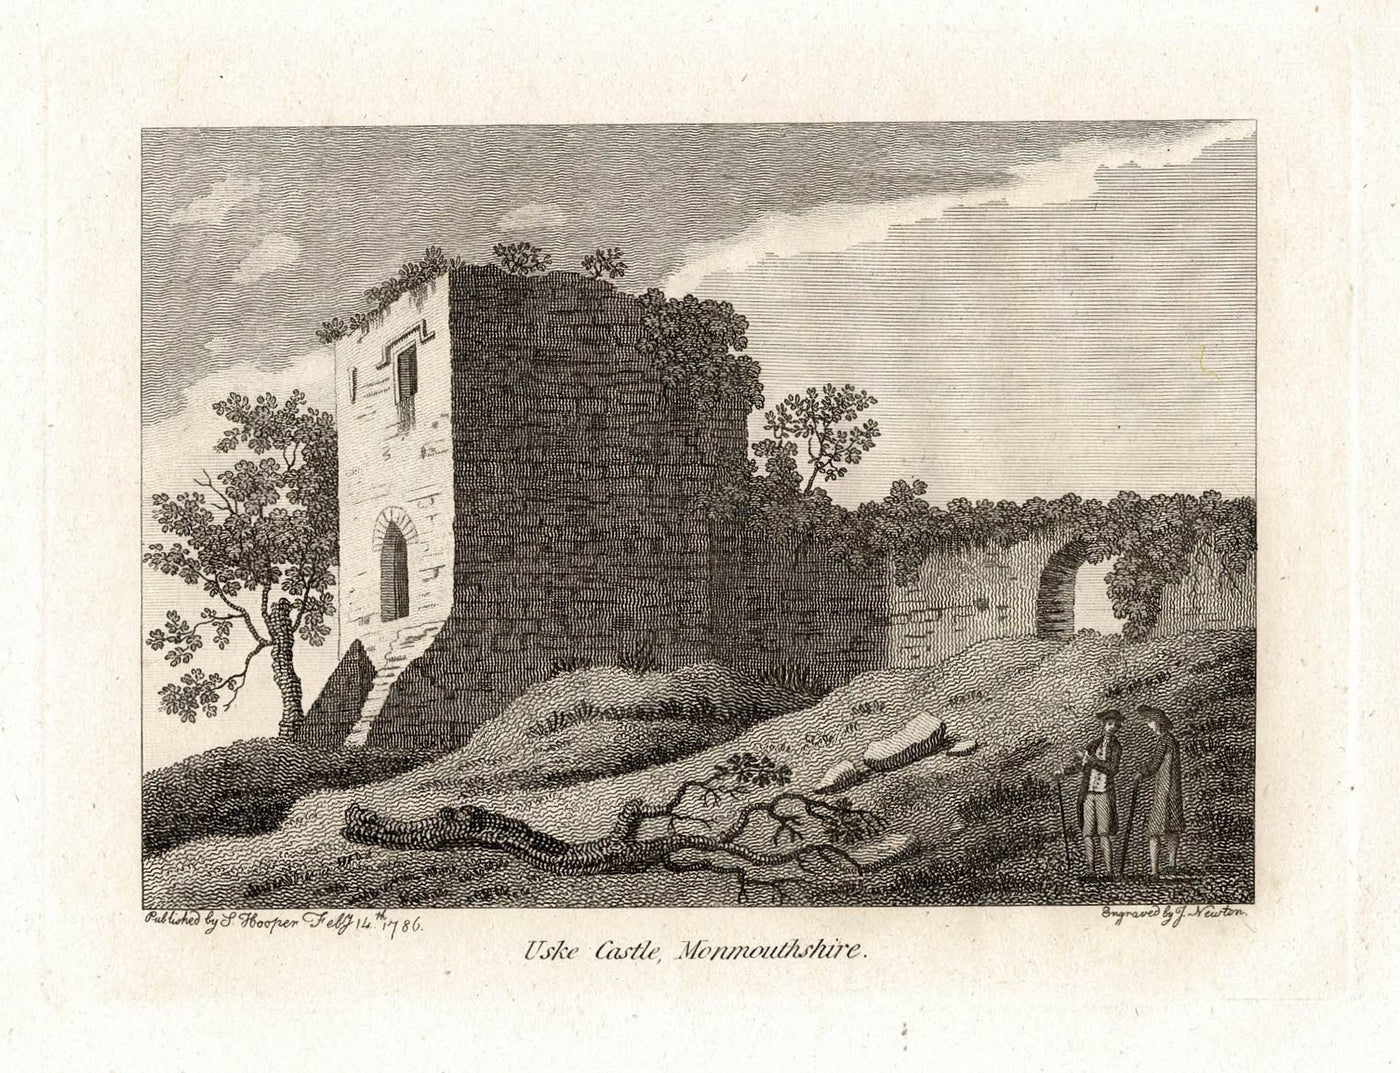 Usk Castle Monmouthshire Wales antique print 1786